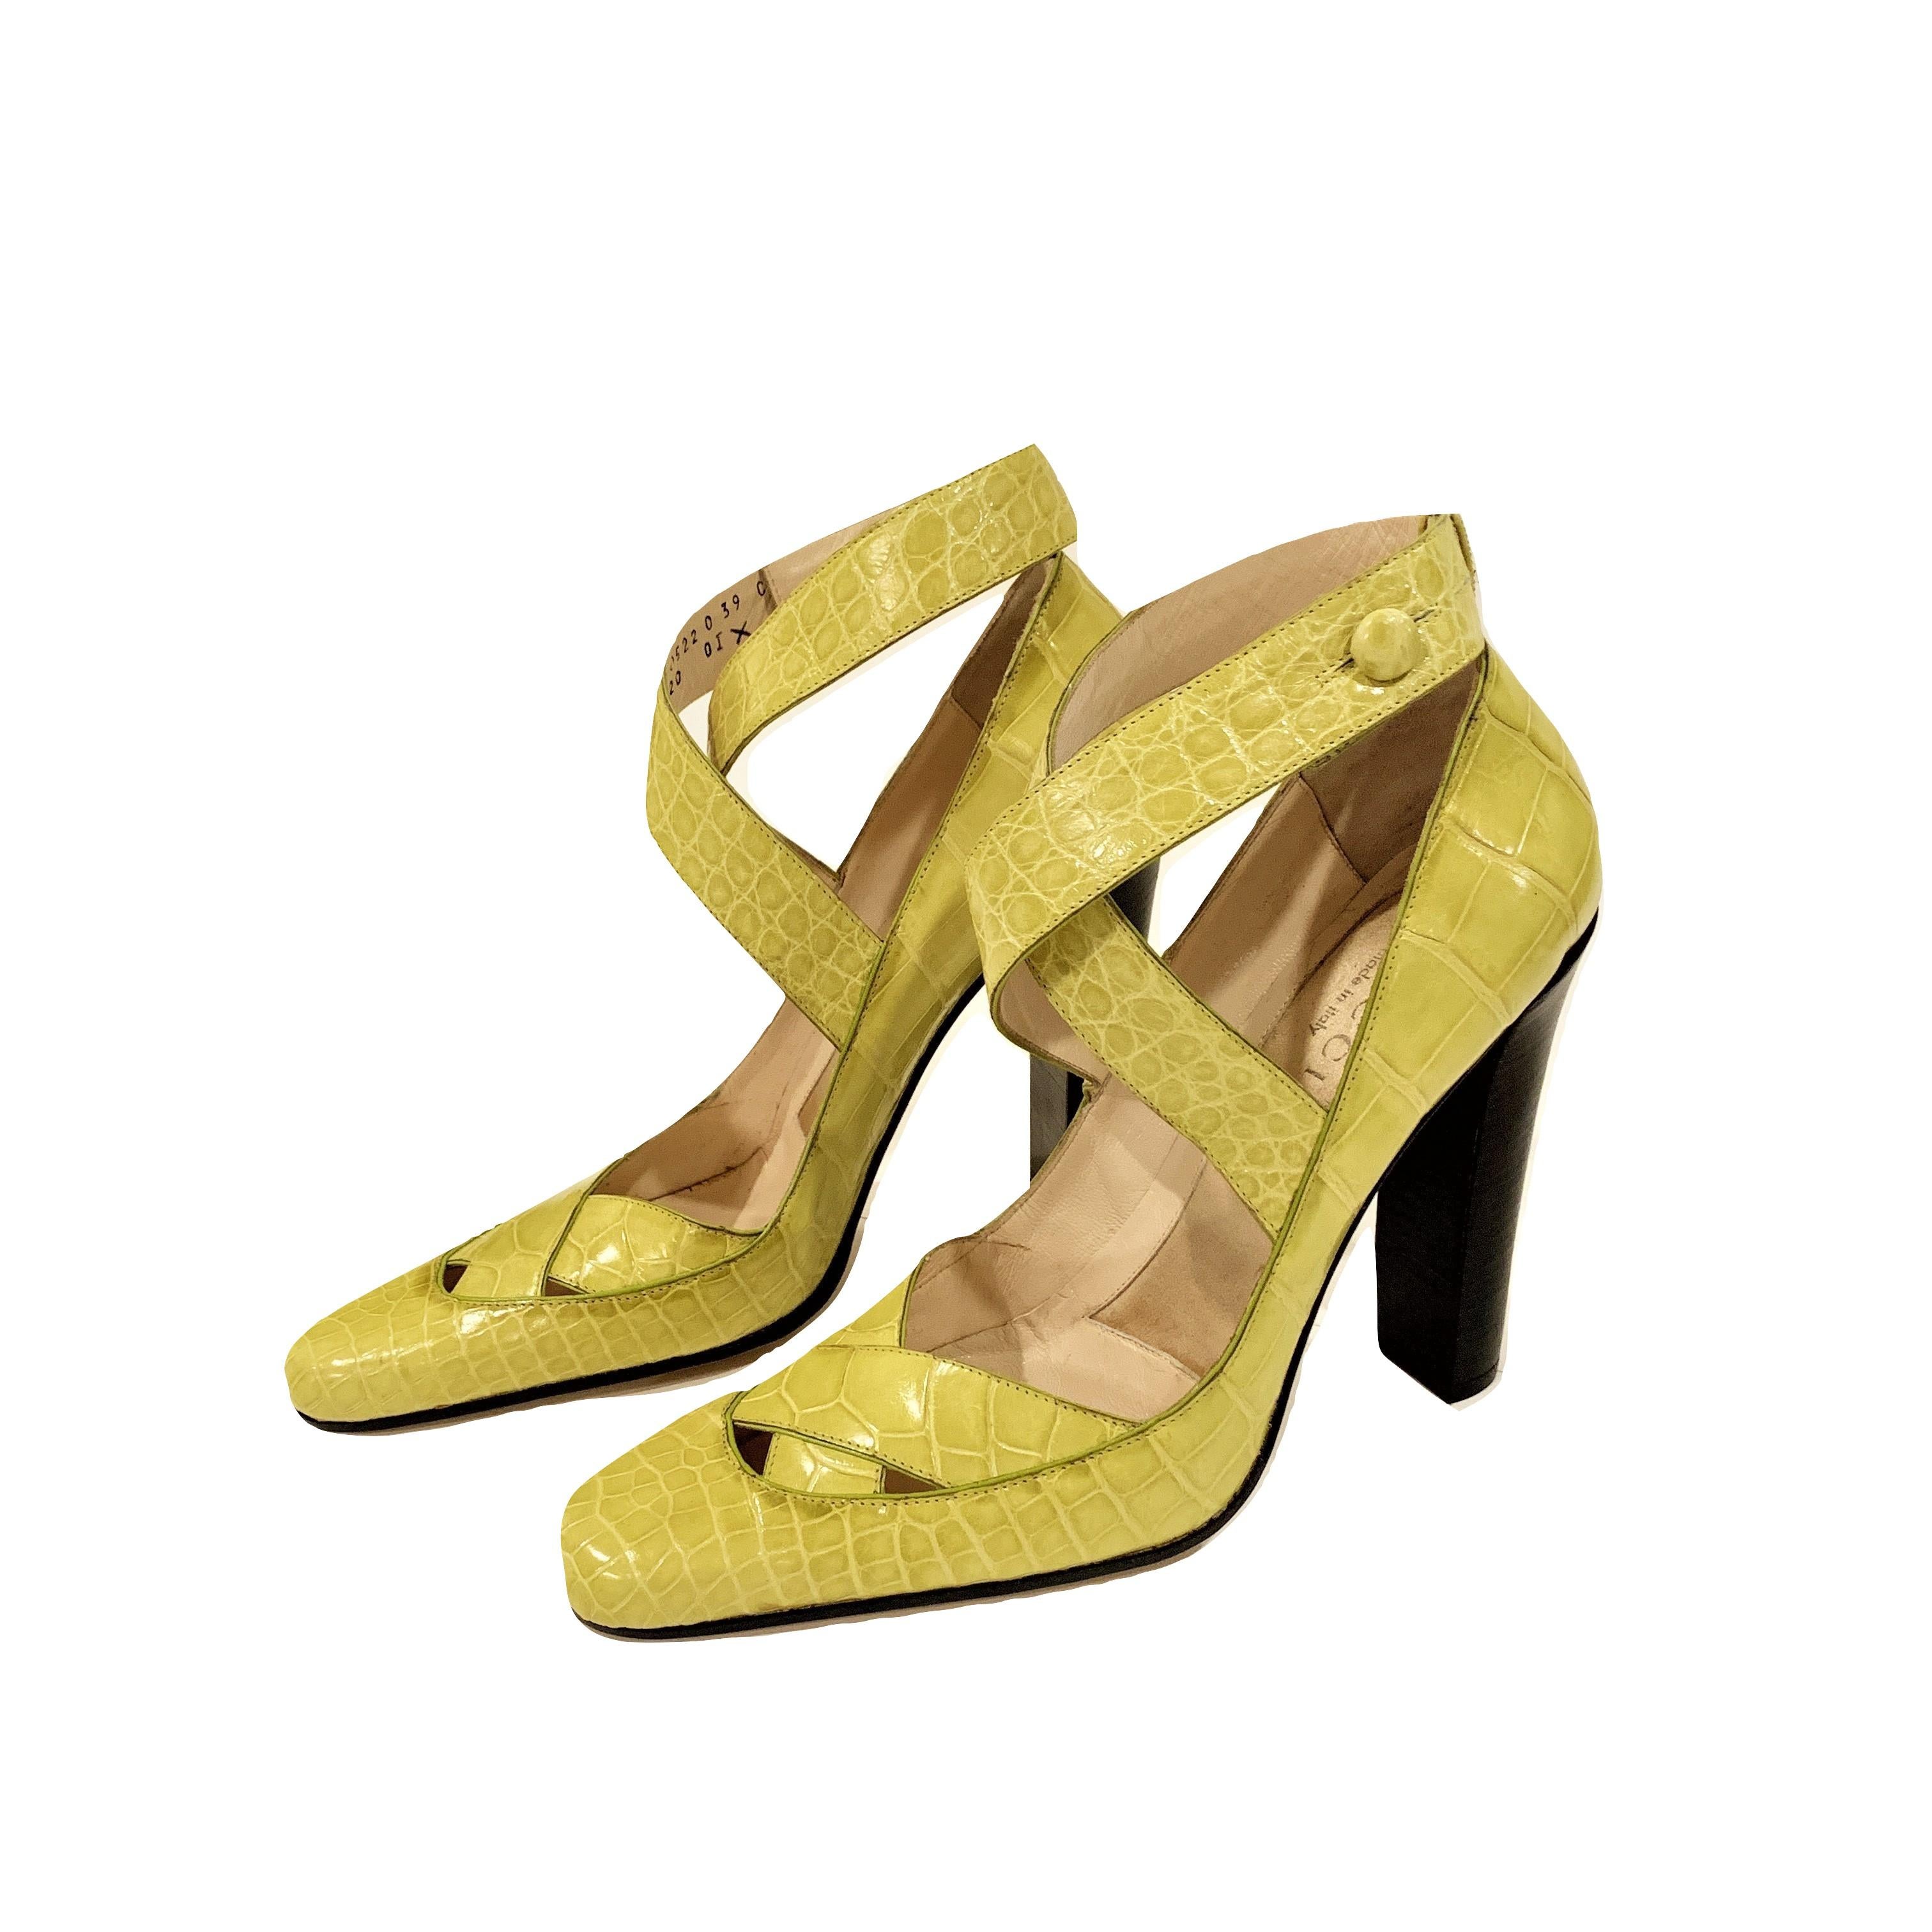 New Tom Ford for Gucci Crocodile Ballerina Heels Pumps in Light Chartreuse Sz 39 2